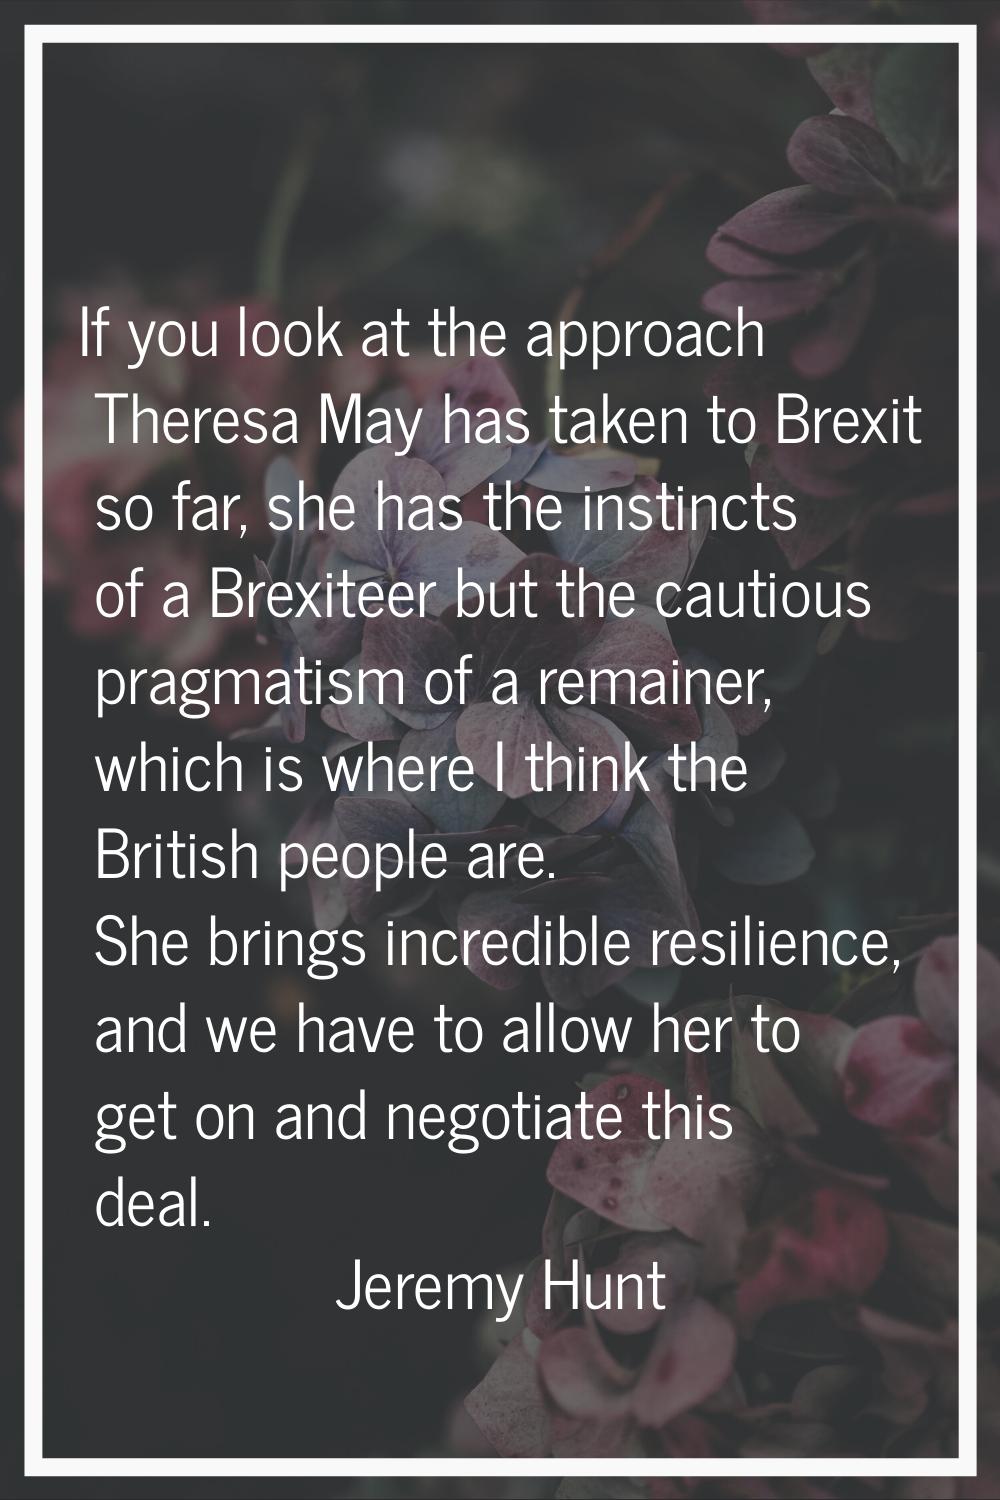 If you look at the approach Theresa May has taken to Brexit so far, she has the instincts of a Brex